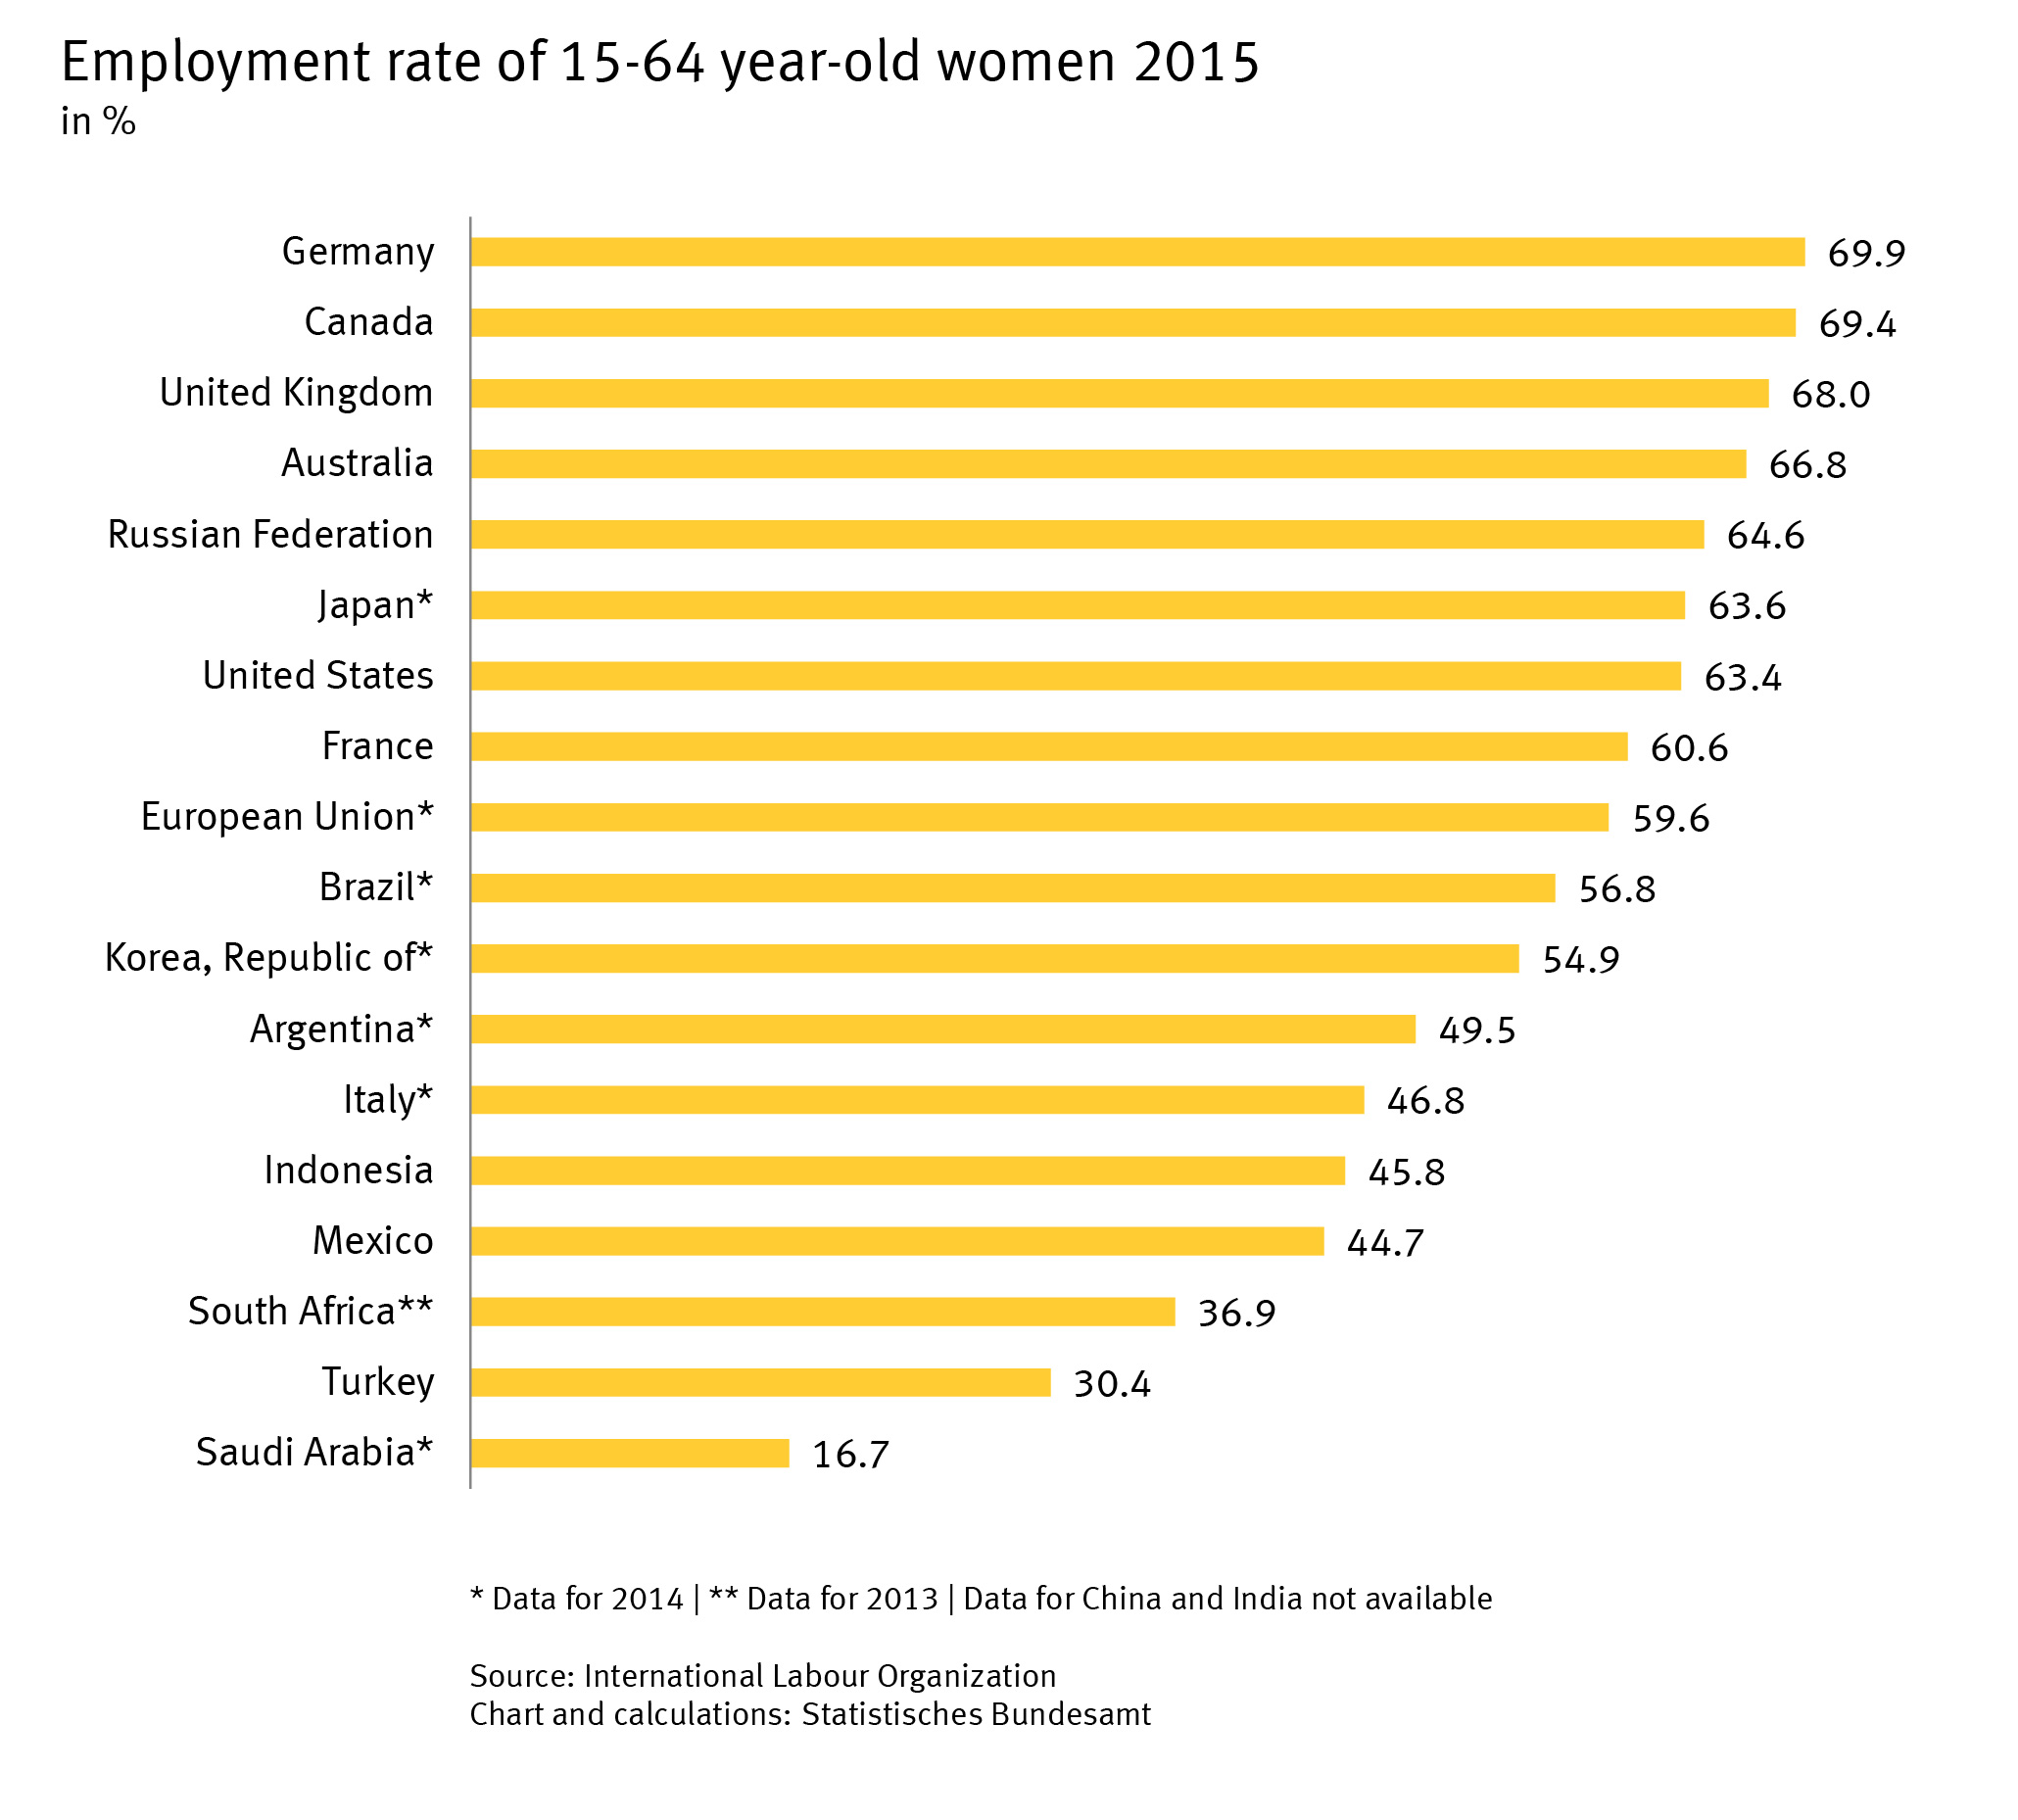 Employment rate of 15-64 year-old women